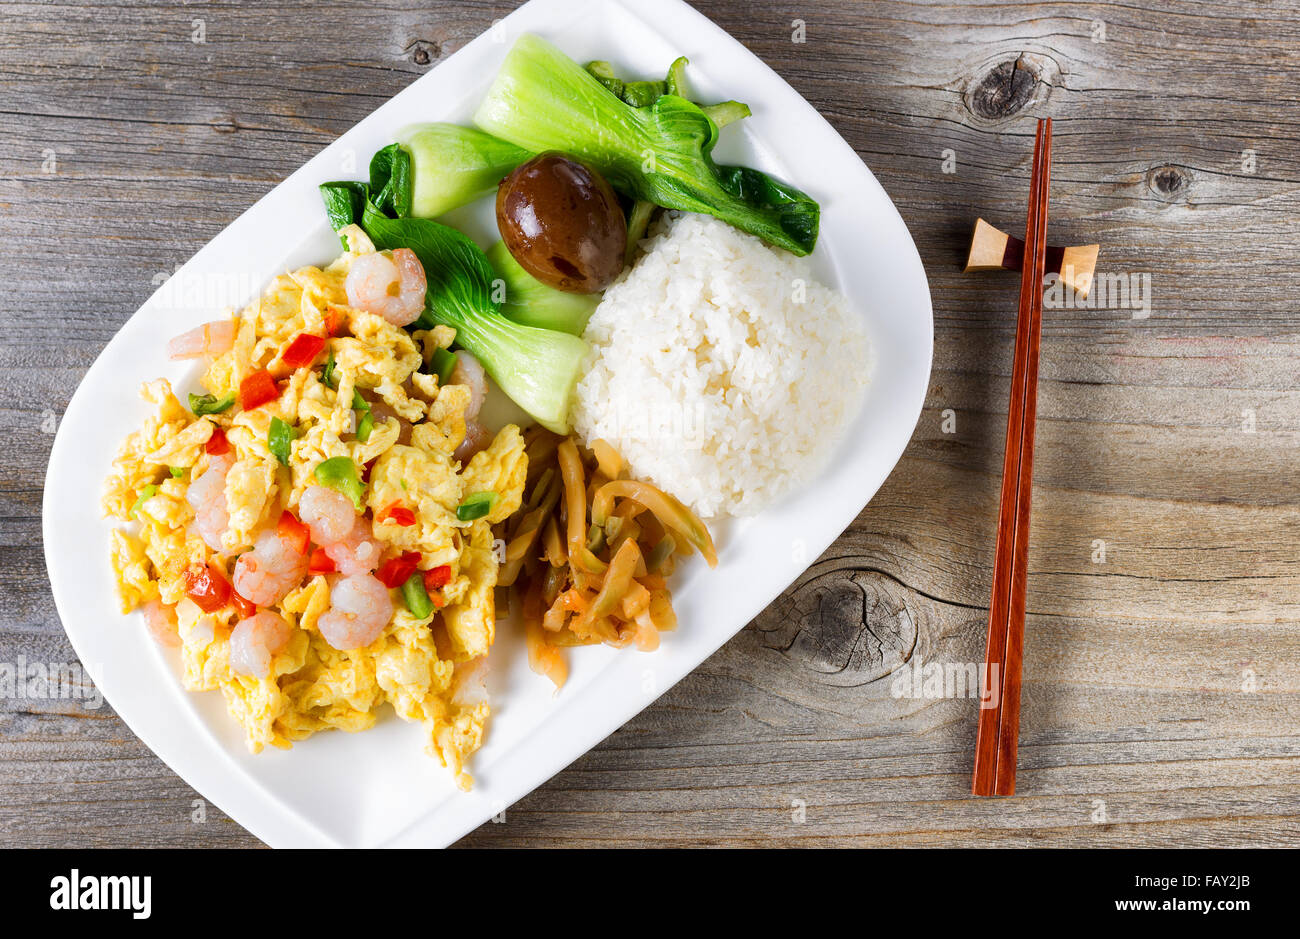 Top view of freshly cooked egg and shrimp dish with bok choy, soy sauce egg, cucumber, rice and chopsticks in holder on rustic w Stock Photo